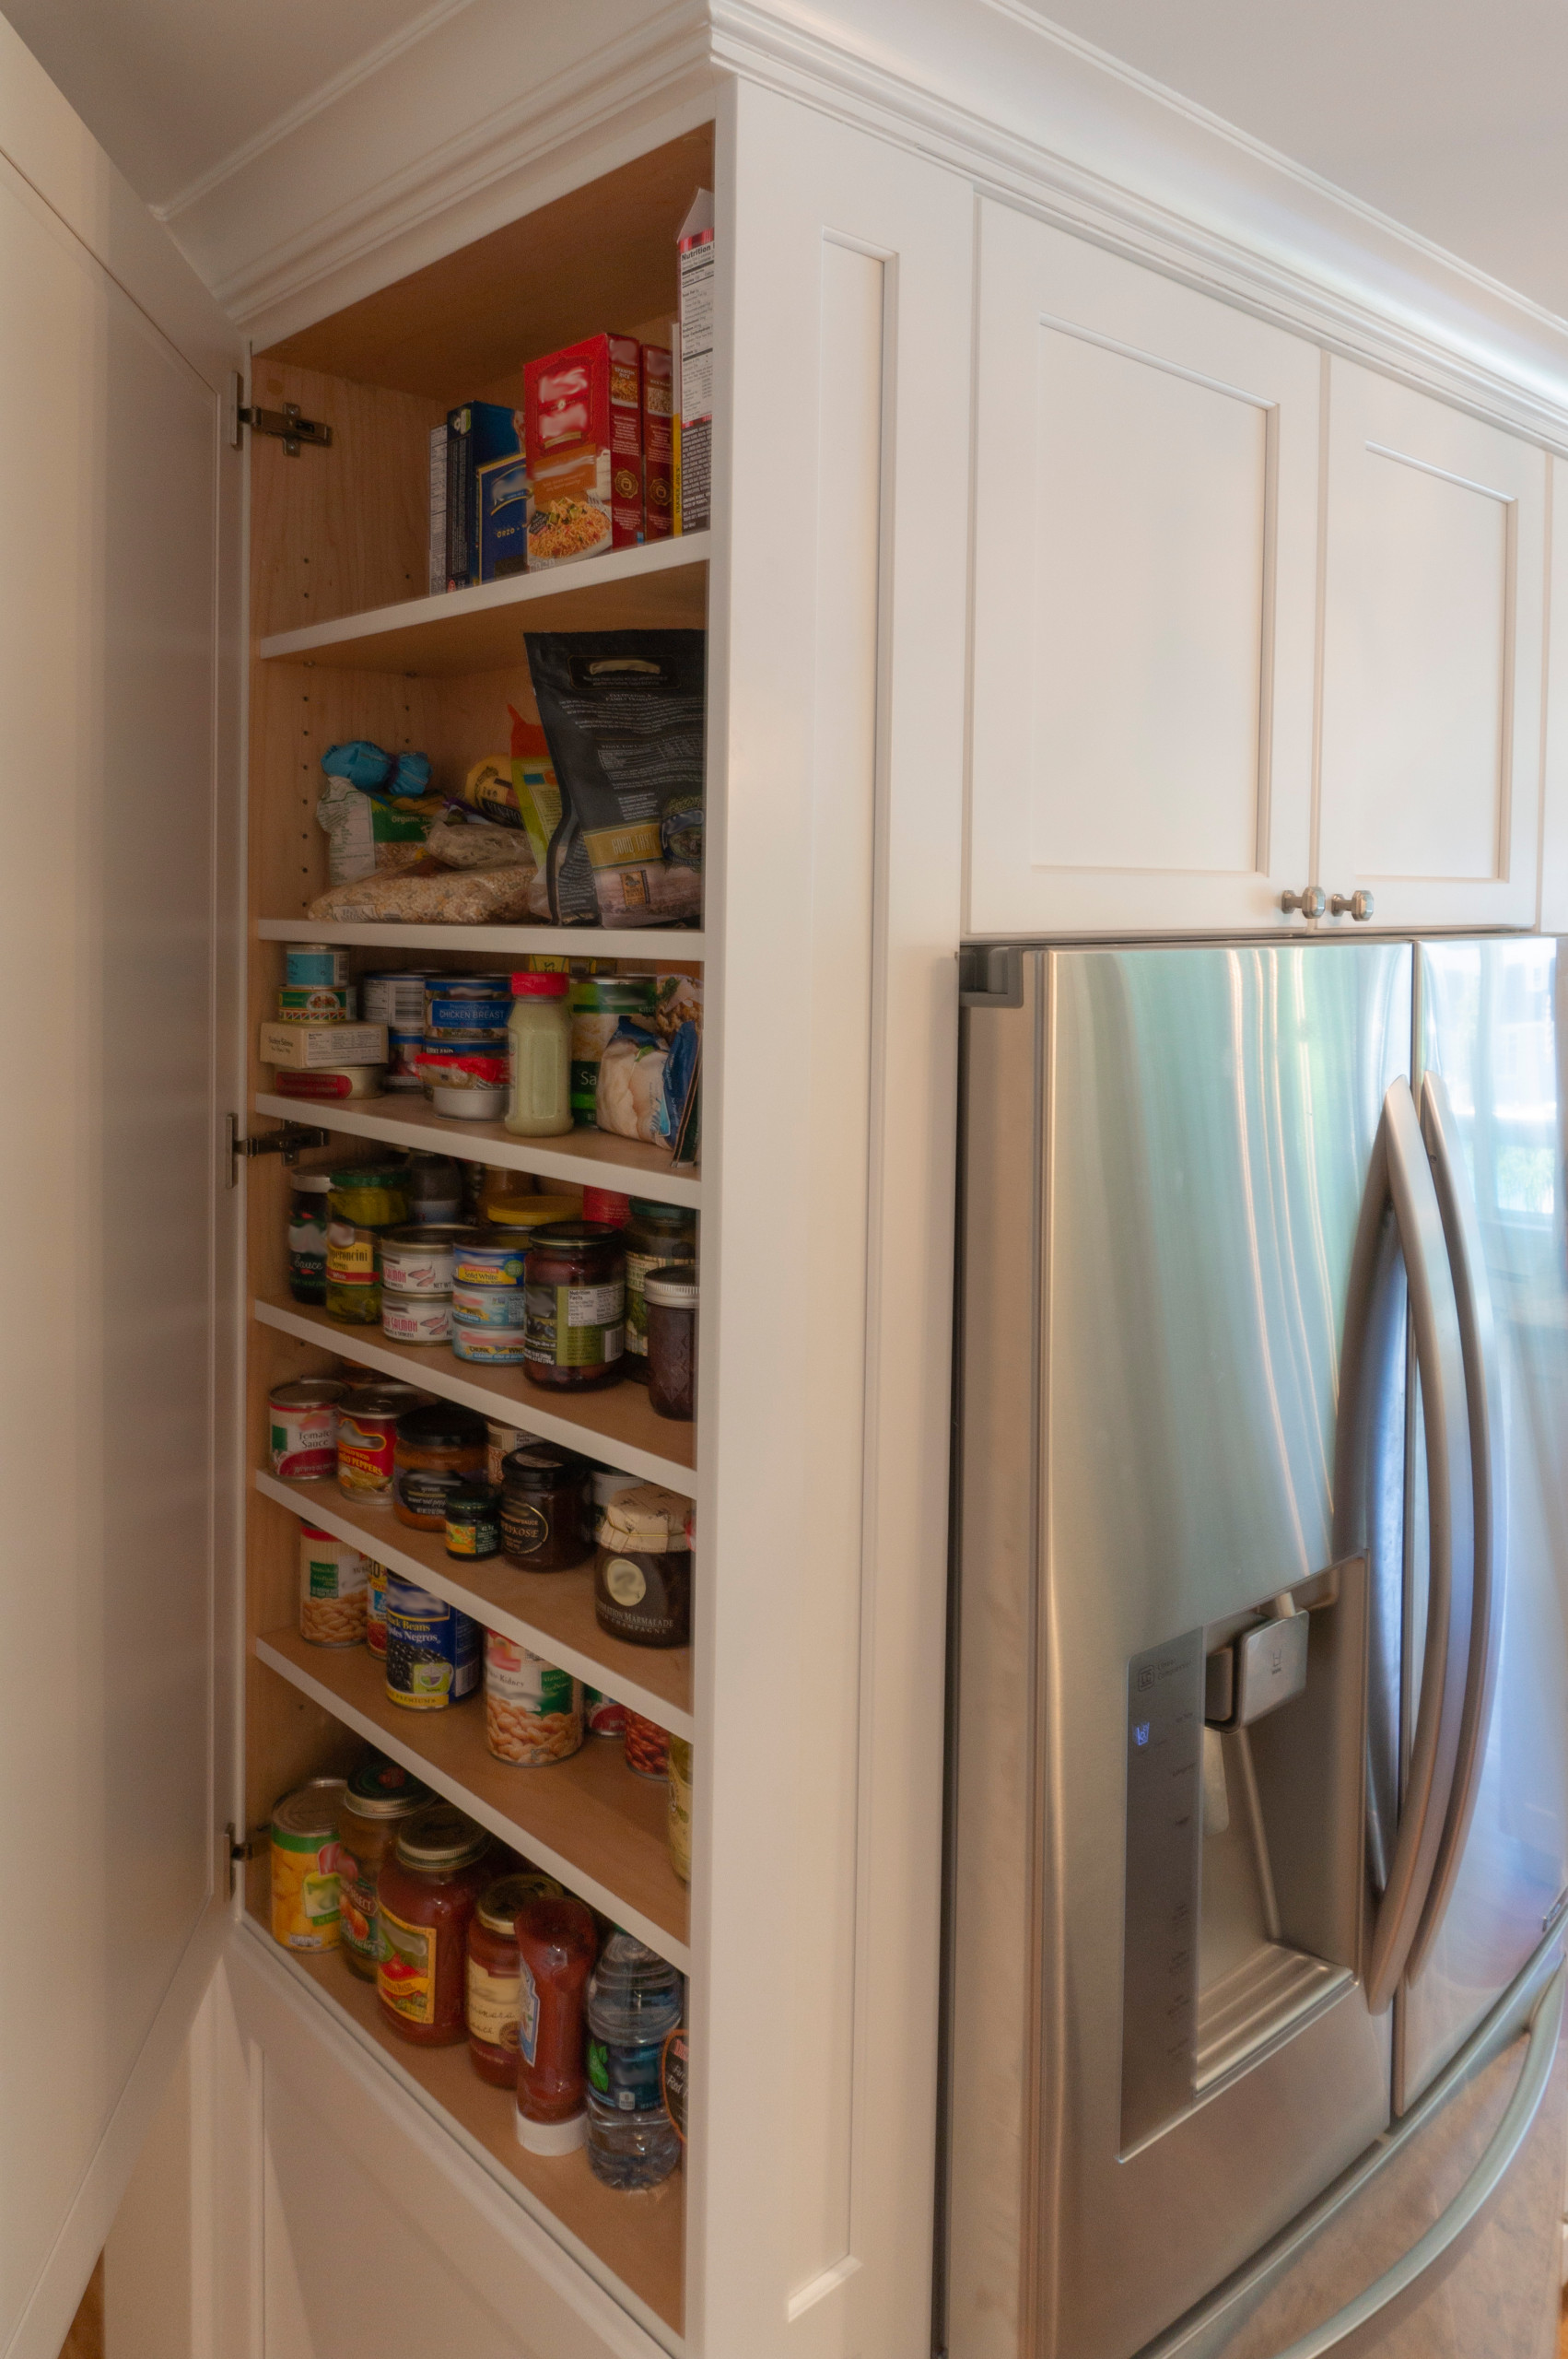 https://st.hzcdn.com/simgs/pictures/kitchens/the-unique-shallow-pantry-is-a-favorite-with-my-clients-here-done-at-9-deep-wi-mh-baker-llc-img~d441ea3b0b802f0e_14-2806-1-8557922.jpg